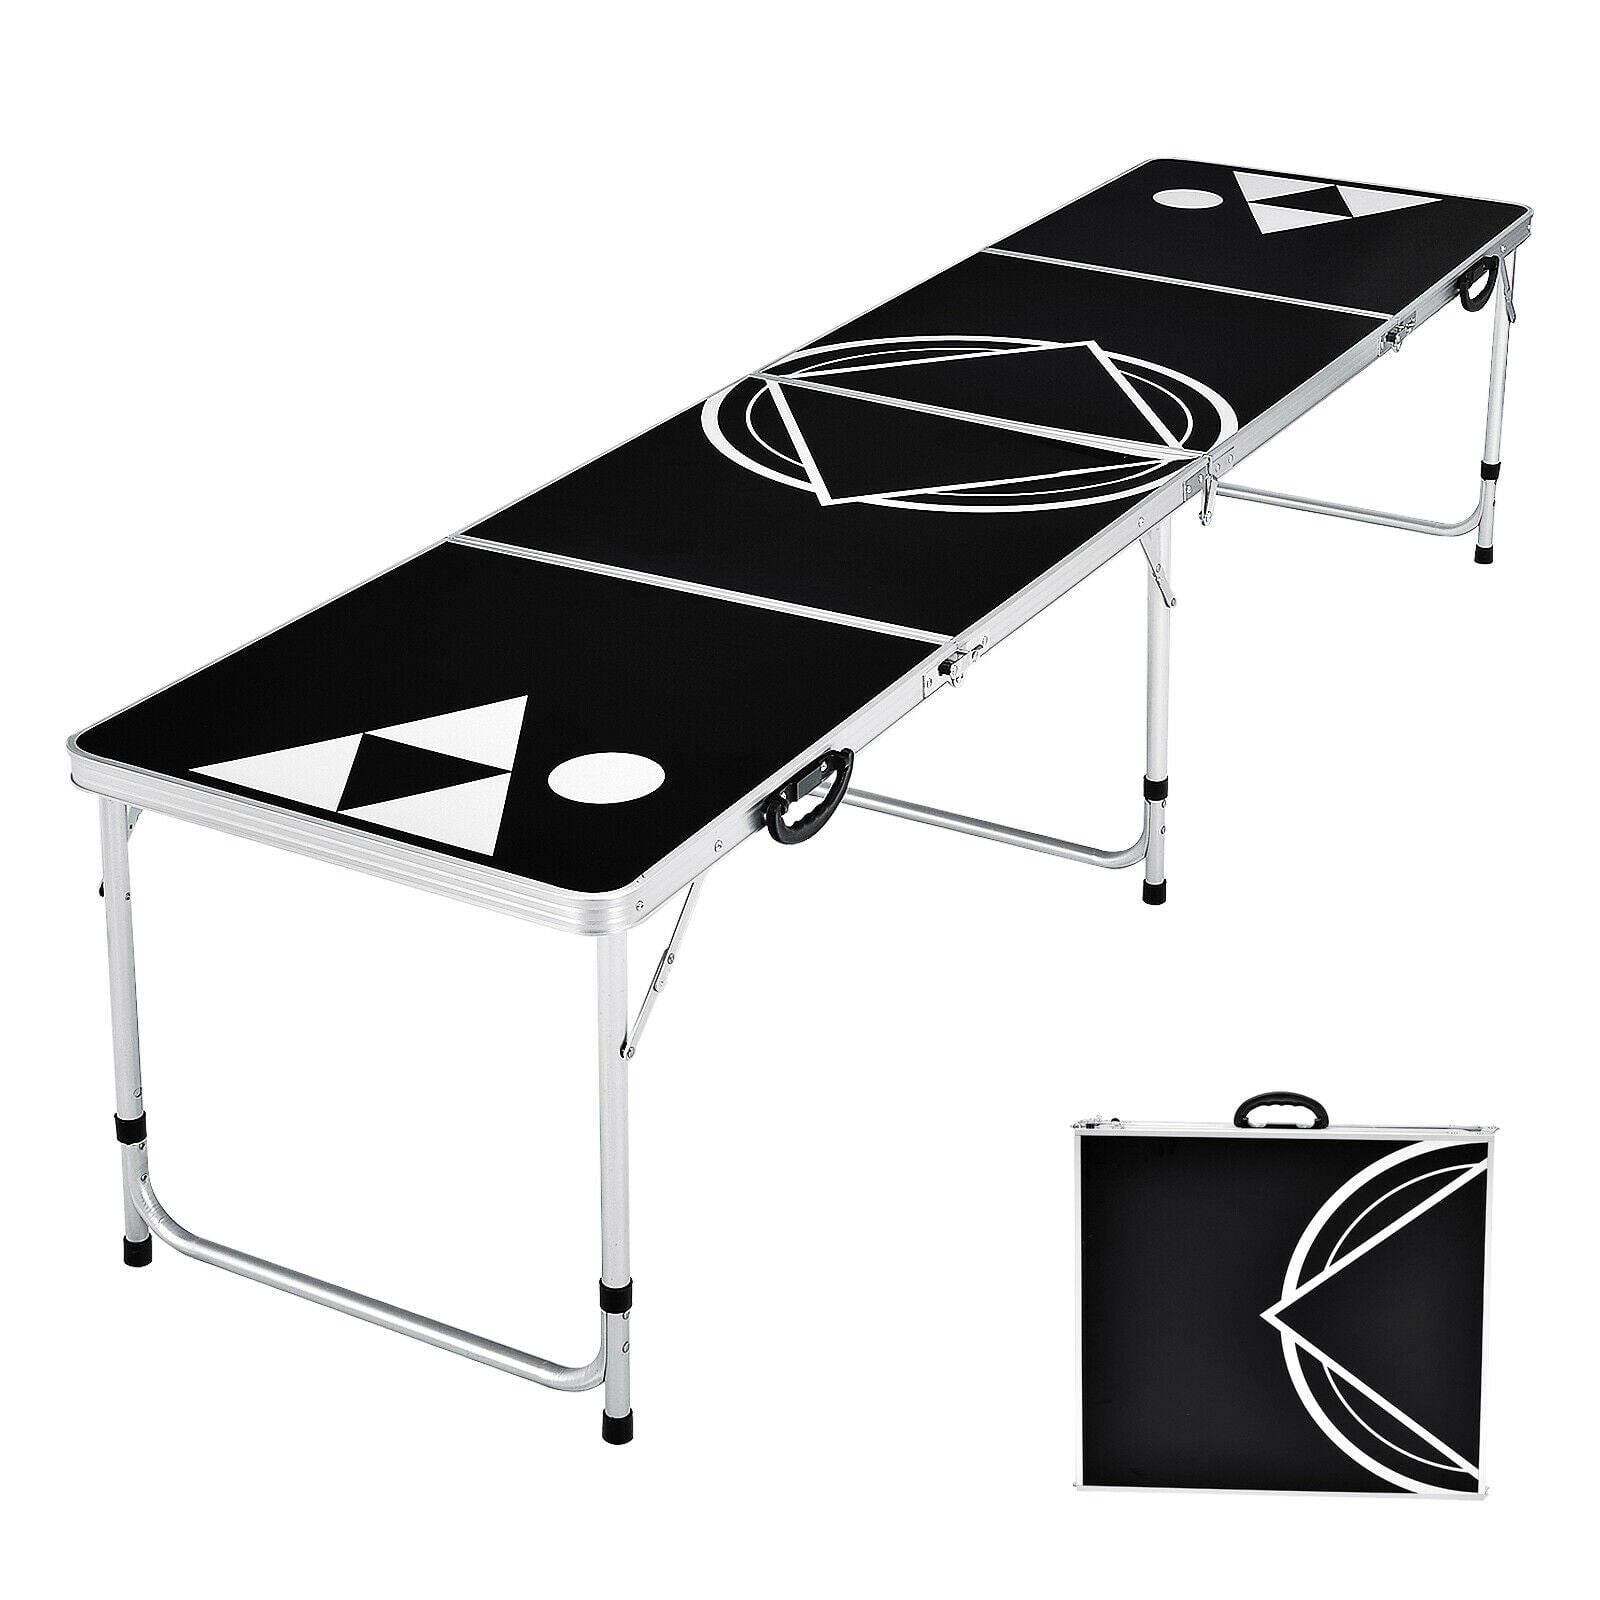 Custpromo Portable 8 Foot Foldable Beer Pong Table Picnic Table Camping Table Indoor or Outdoor Activities 